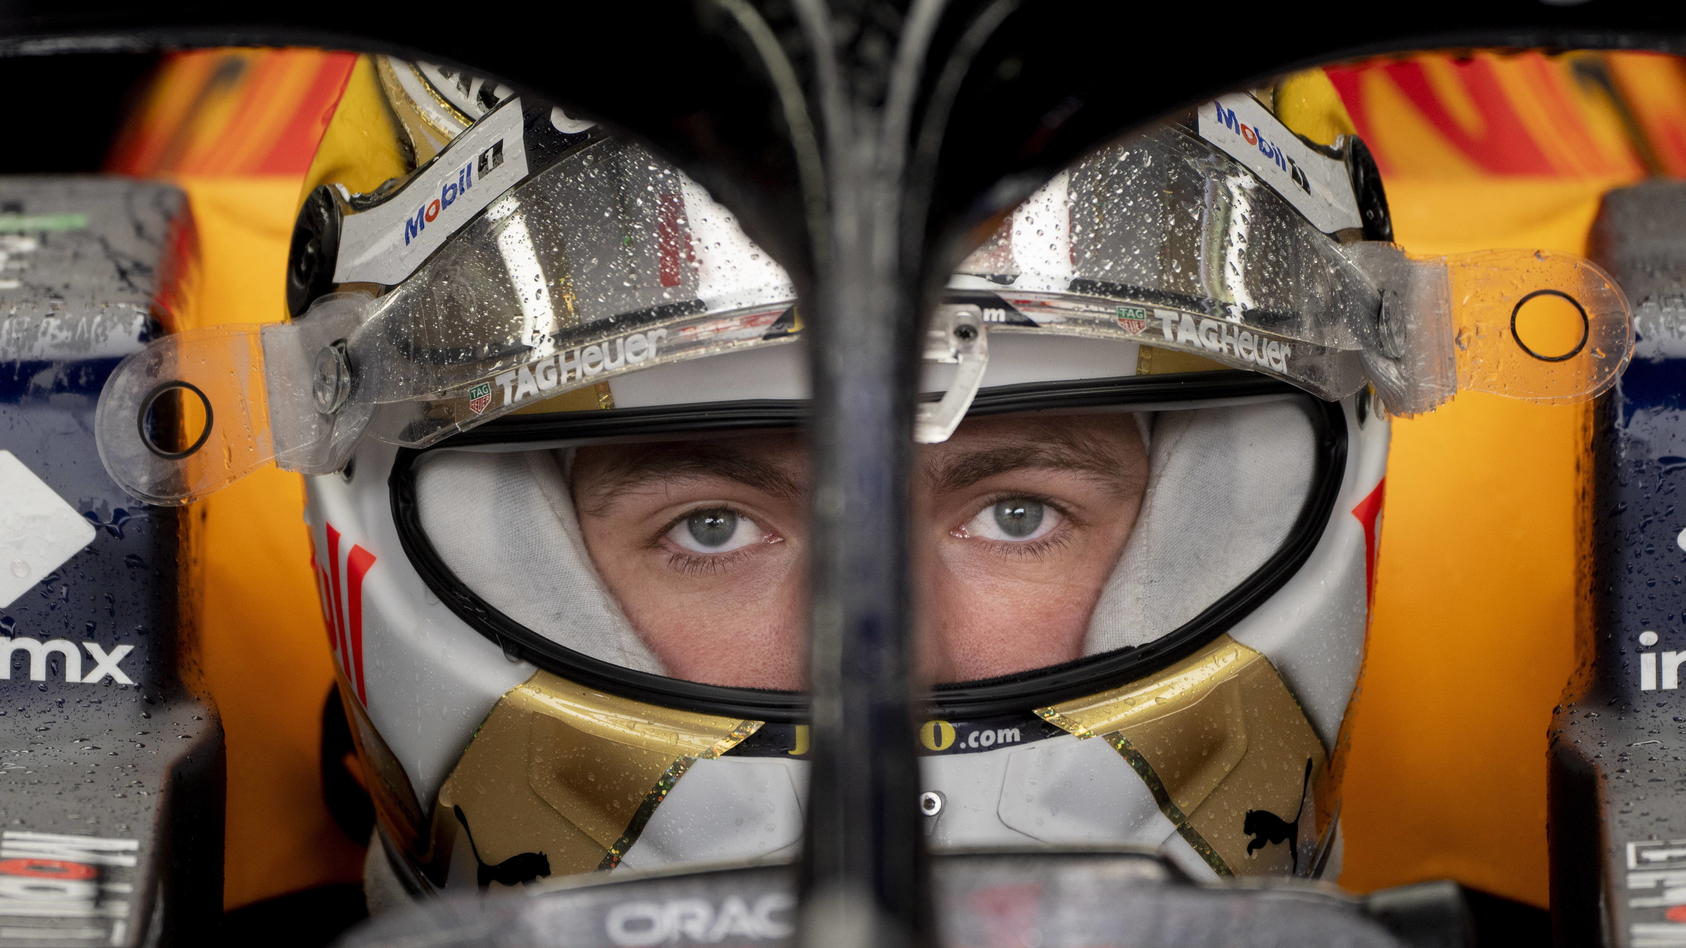  June 18, 2022, Montreal, PQ, Canada: Red Bull Racing Max Verstappen of the Netherlands sits in his car during the third practice session at the Formula One Canadian Grand Prix in Montreal, Saturday, June 18, 2022. Max Verstappen PUBLICATIONxINxGERxS